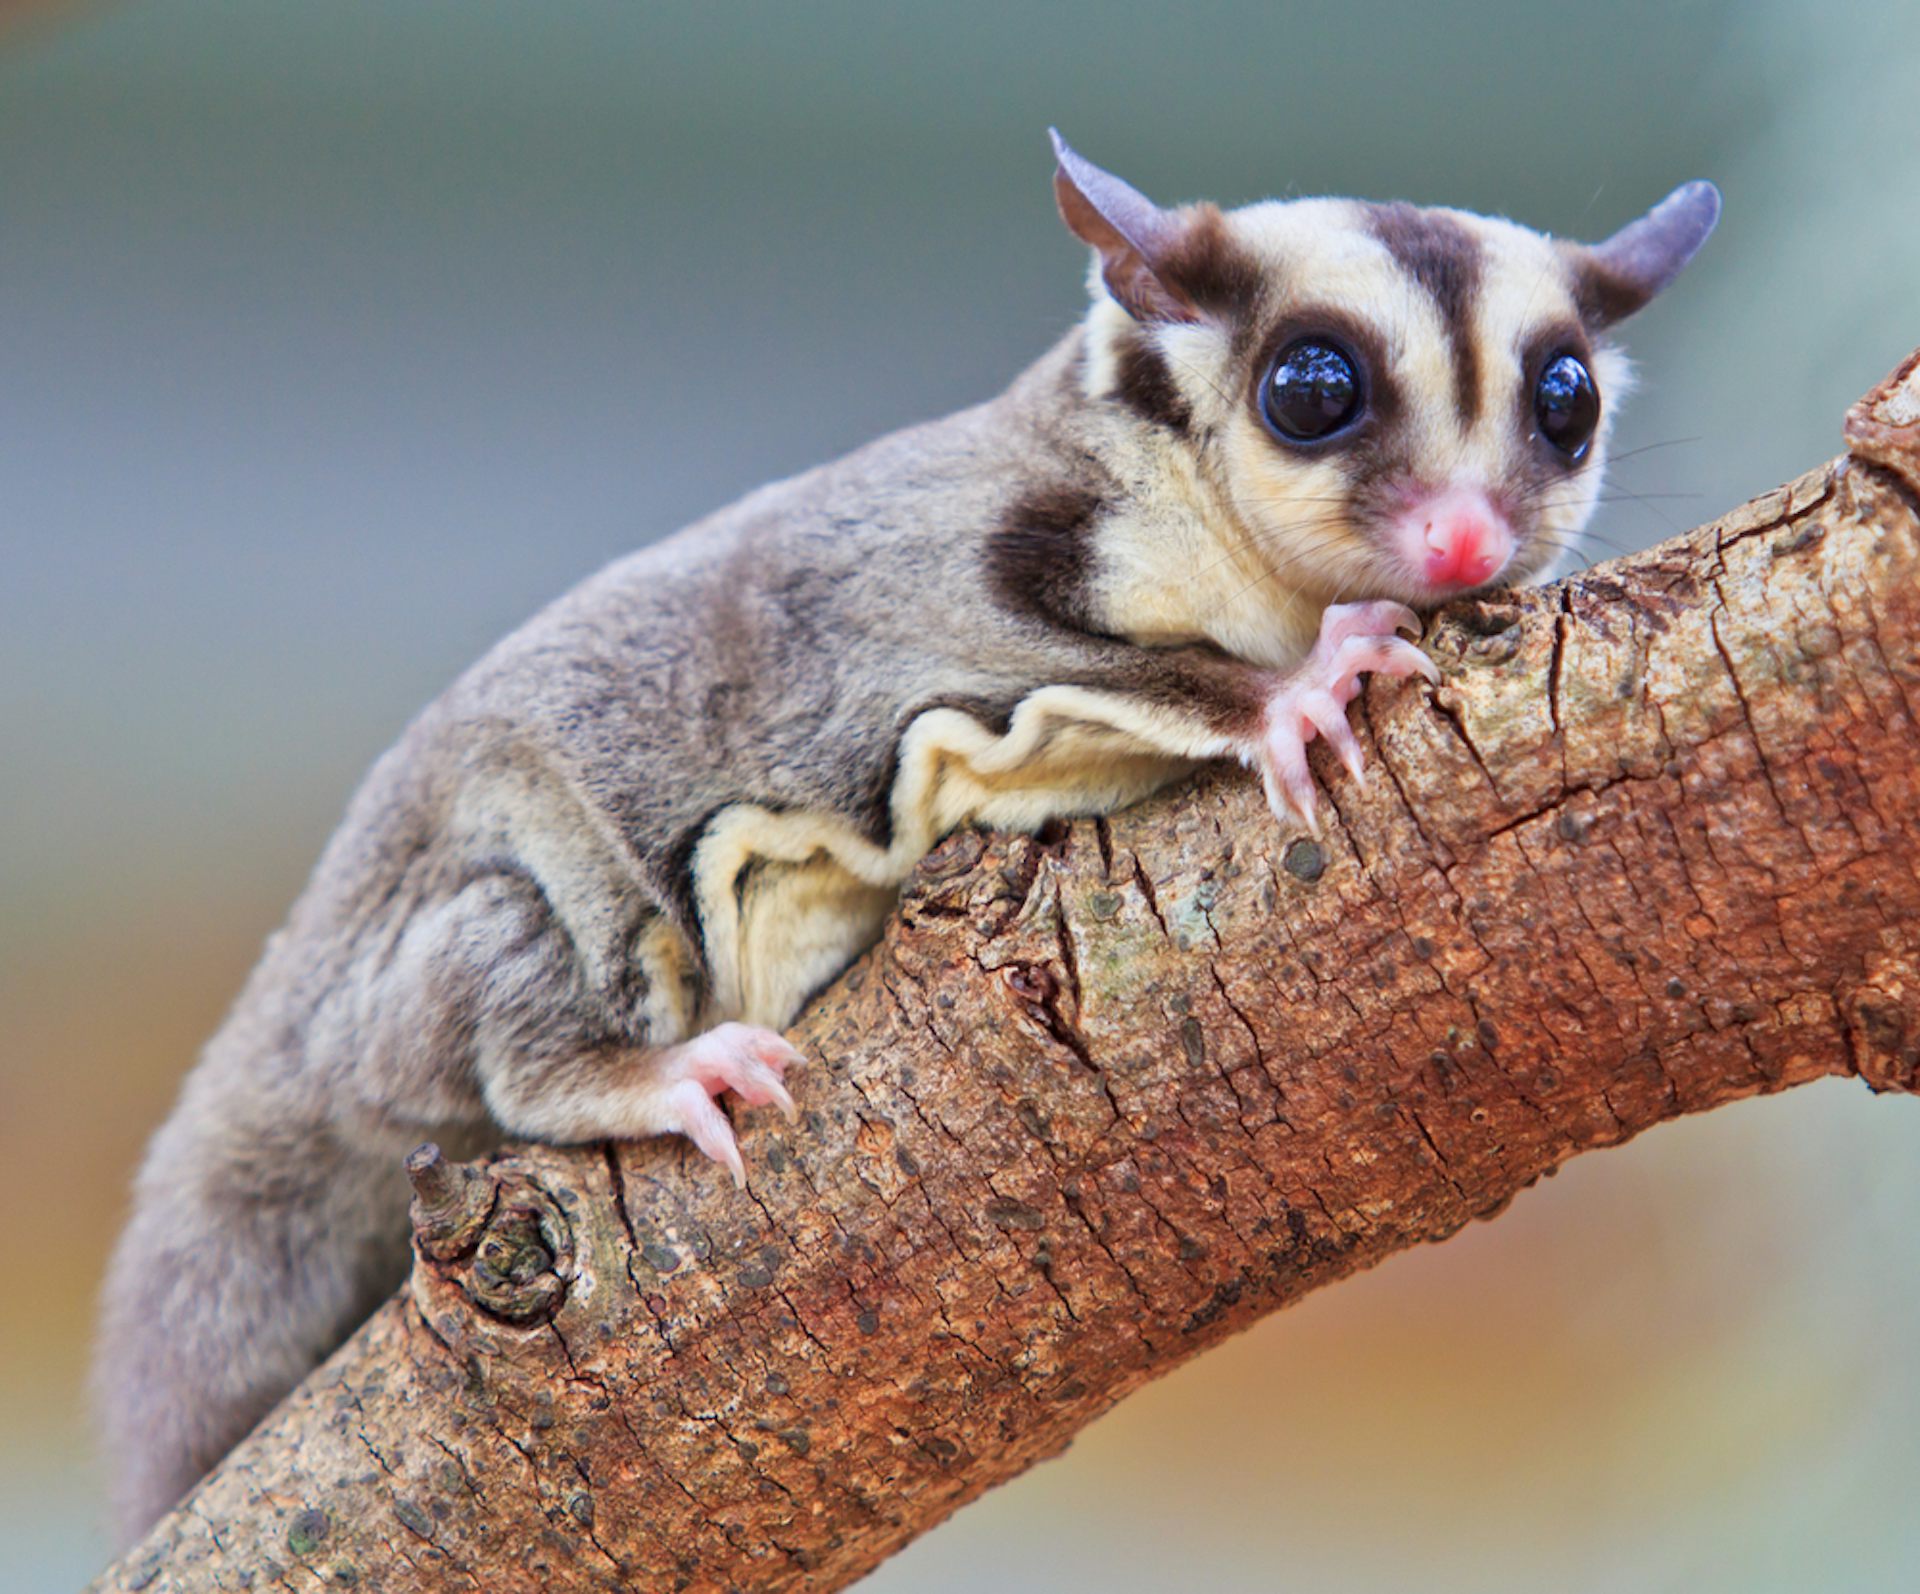 A cute grey and cream striped animal on a tree branch with distinctive skin folds visible on its side